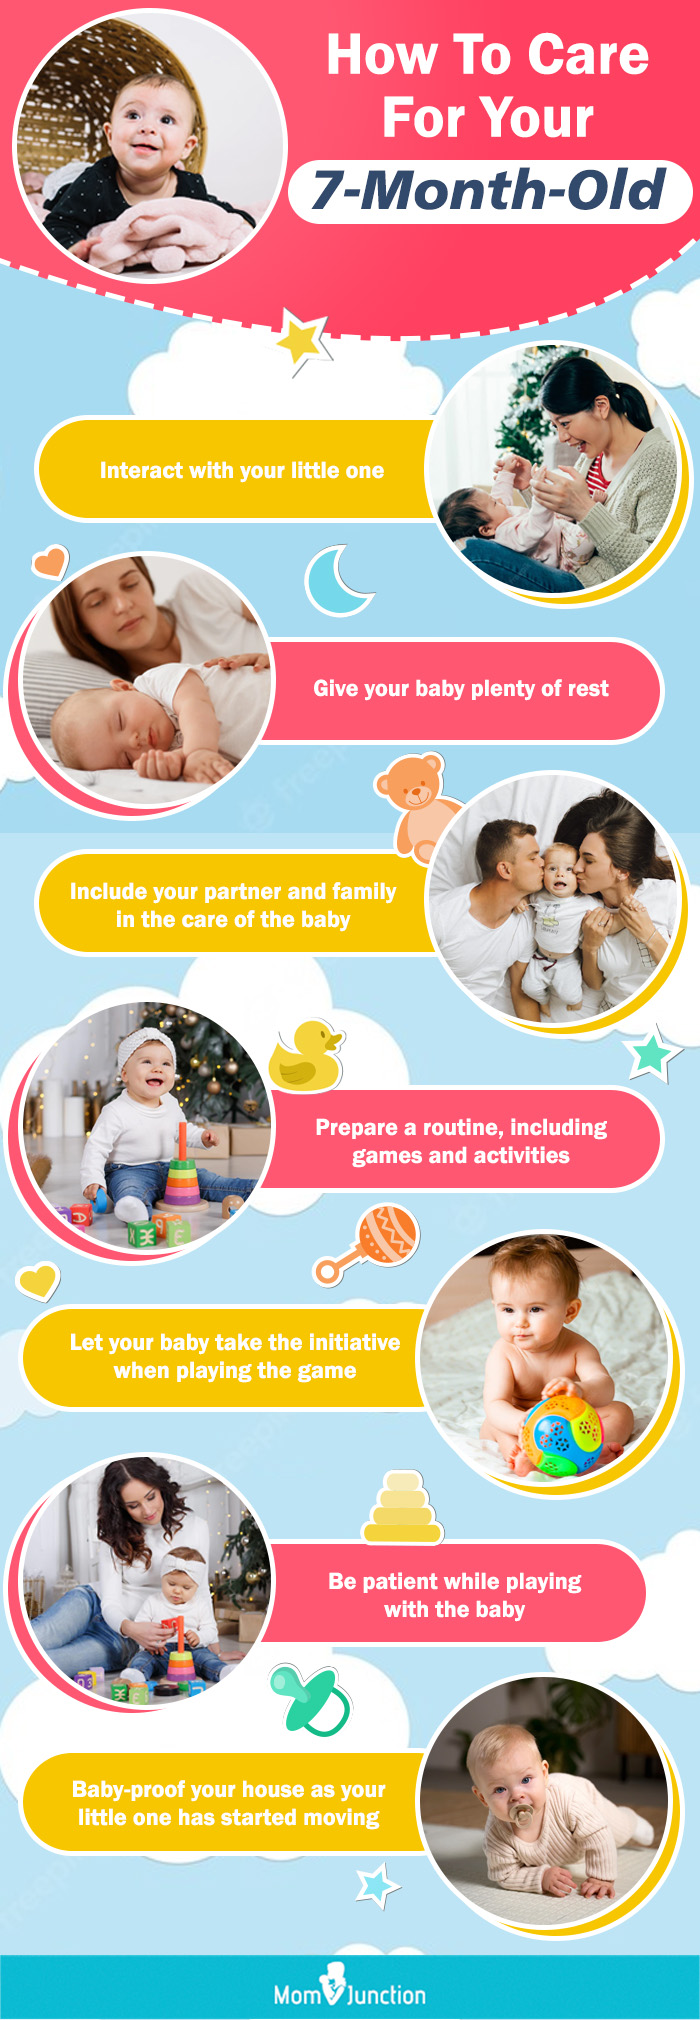 how to care for your 7 month old (infographic)